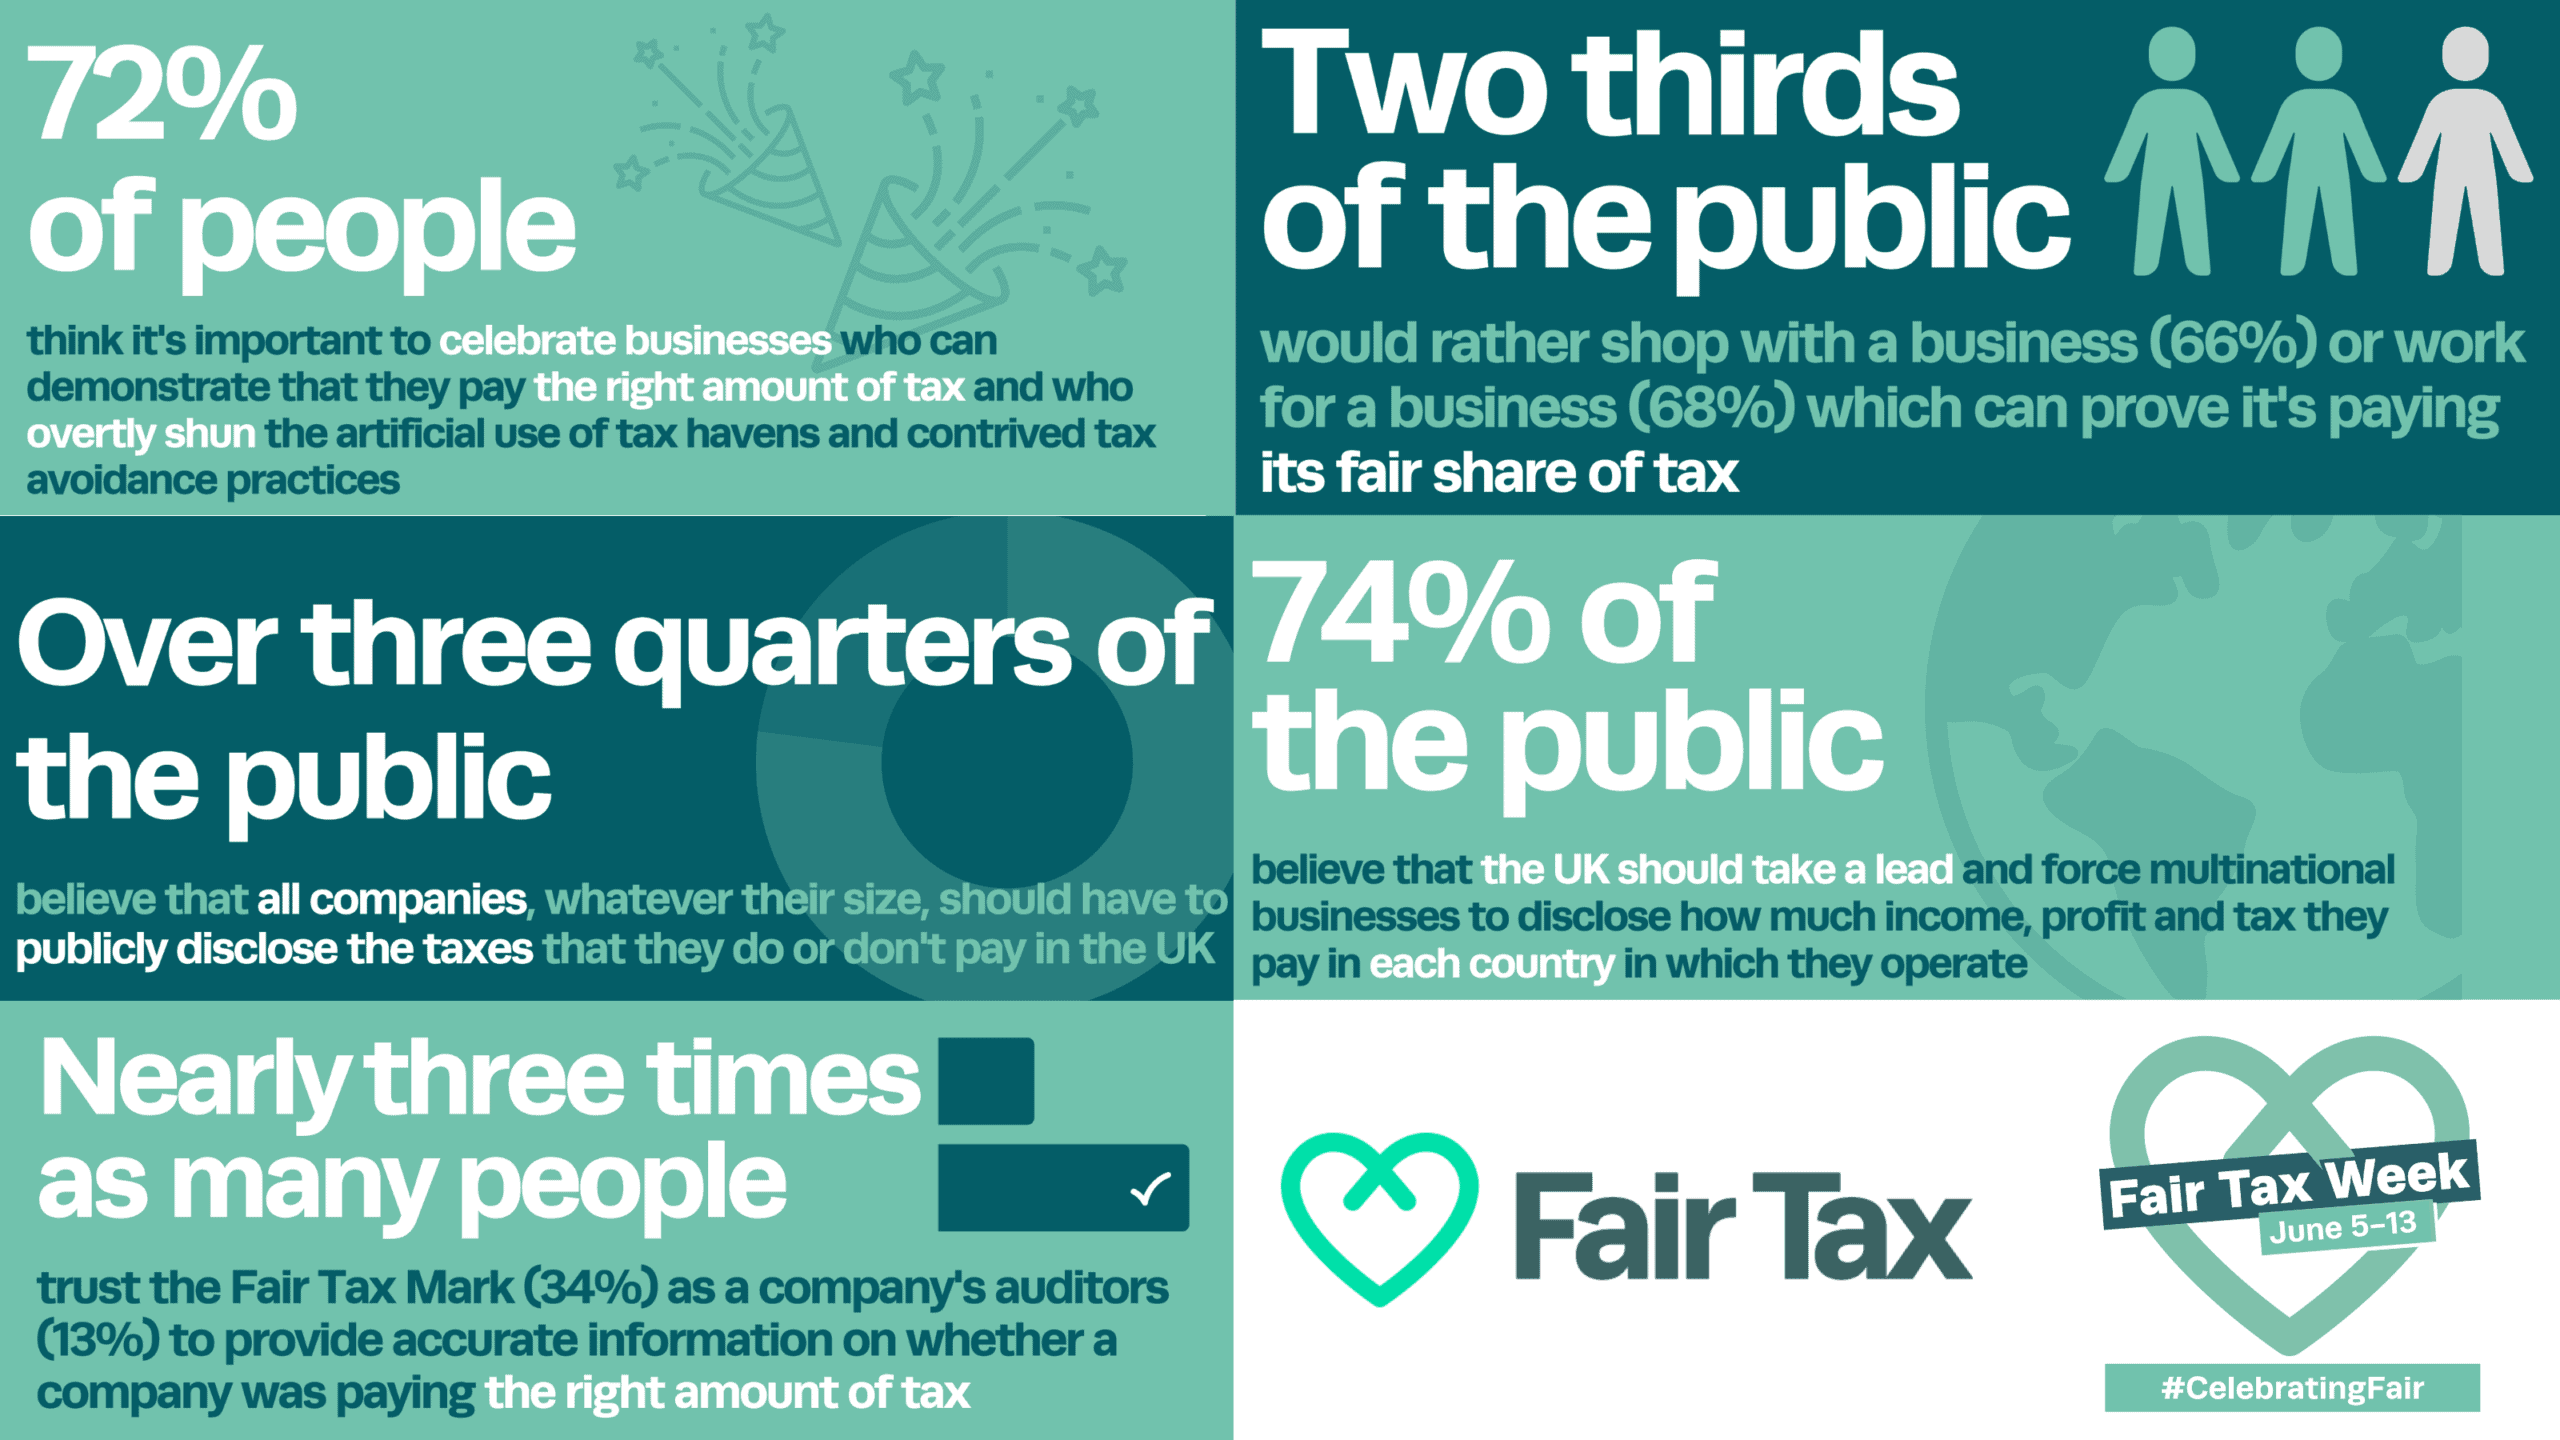 Fair Tax Week 2021 celebrates responsible business as new data shows